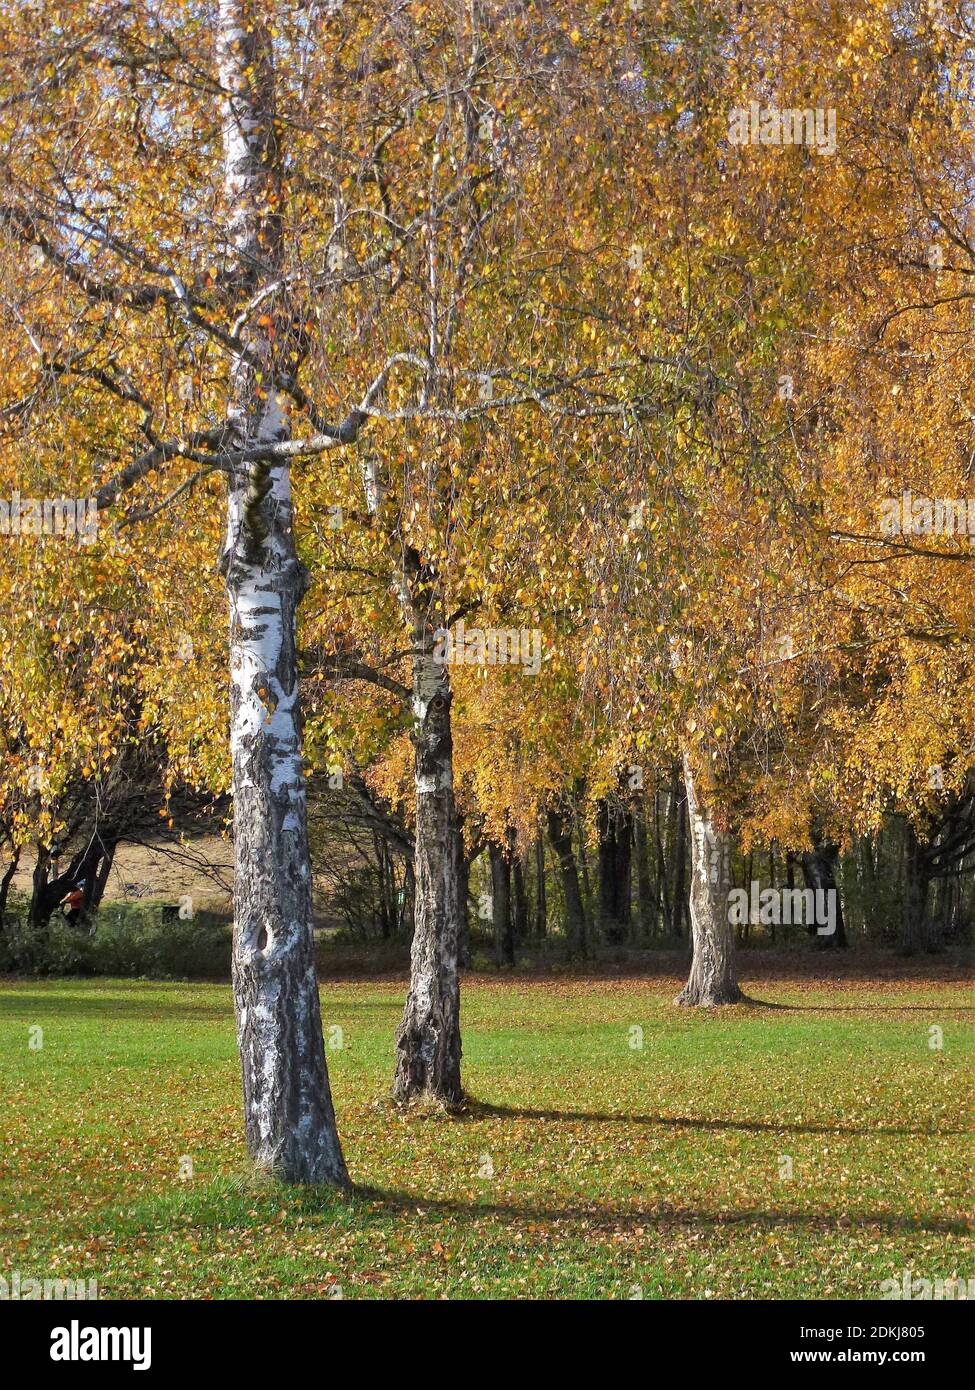 Germany, Bavaria, Germering, lawn at Germeringer See with birch trees Stock Photo